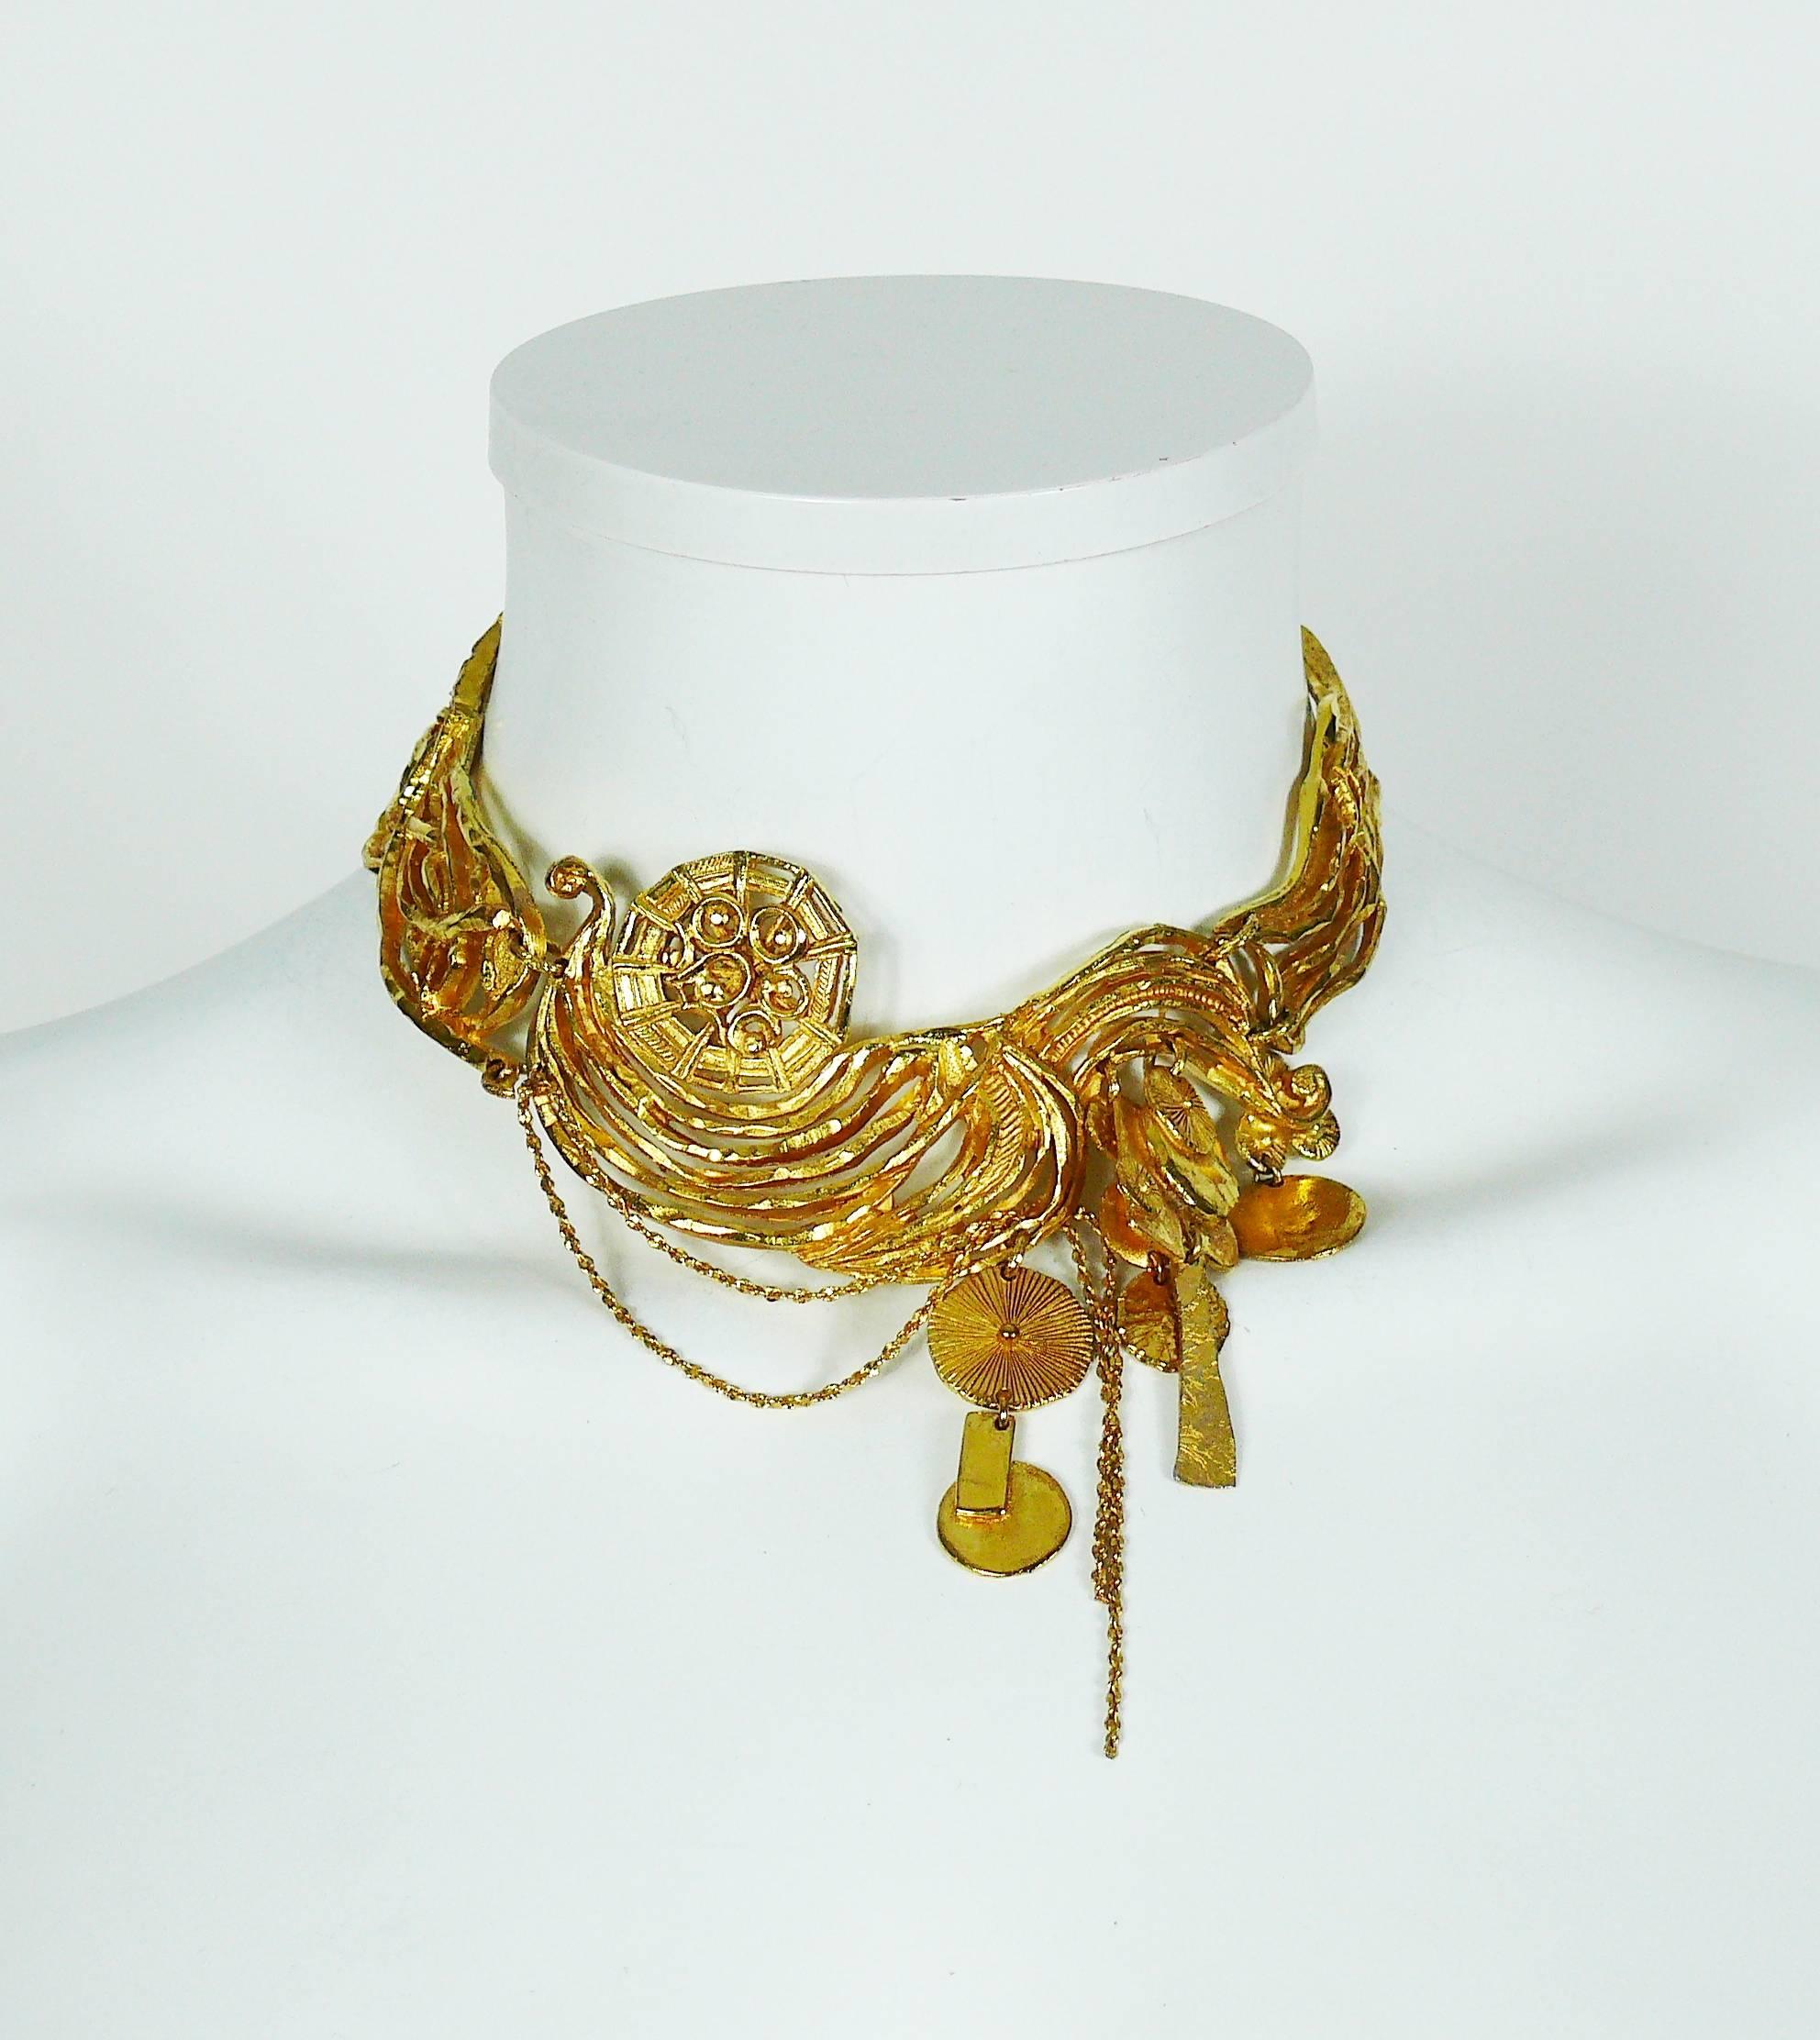 CHRISTIAN LACROIX  gold toned collar necklace featuring a gorgeous openwork design, chains and charms.

Hook clasp closure.
Extension chain.

Marked CHRISTIAN LACROIX CL Made in France.

Indicative measurements : max. circumference approx. 34.24 cm